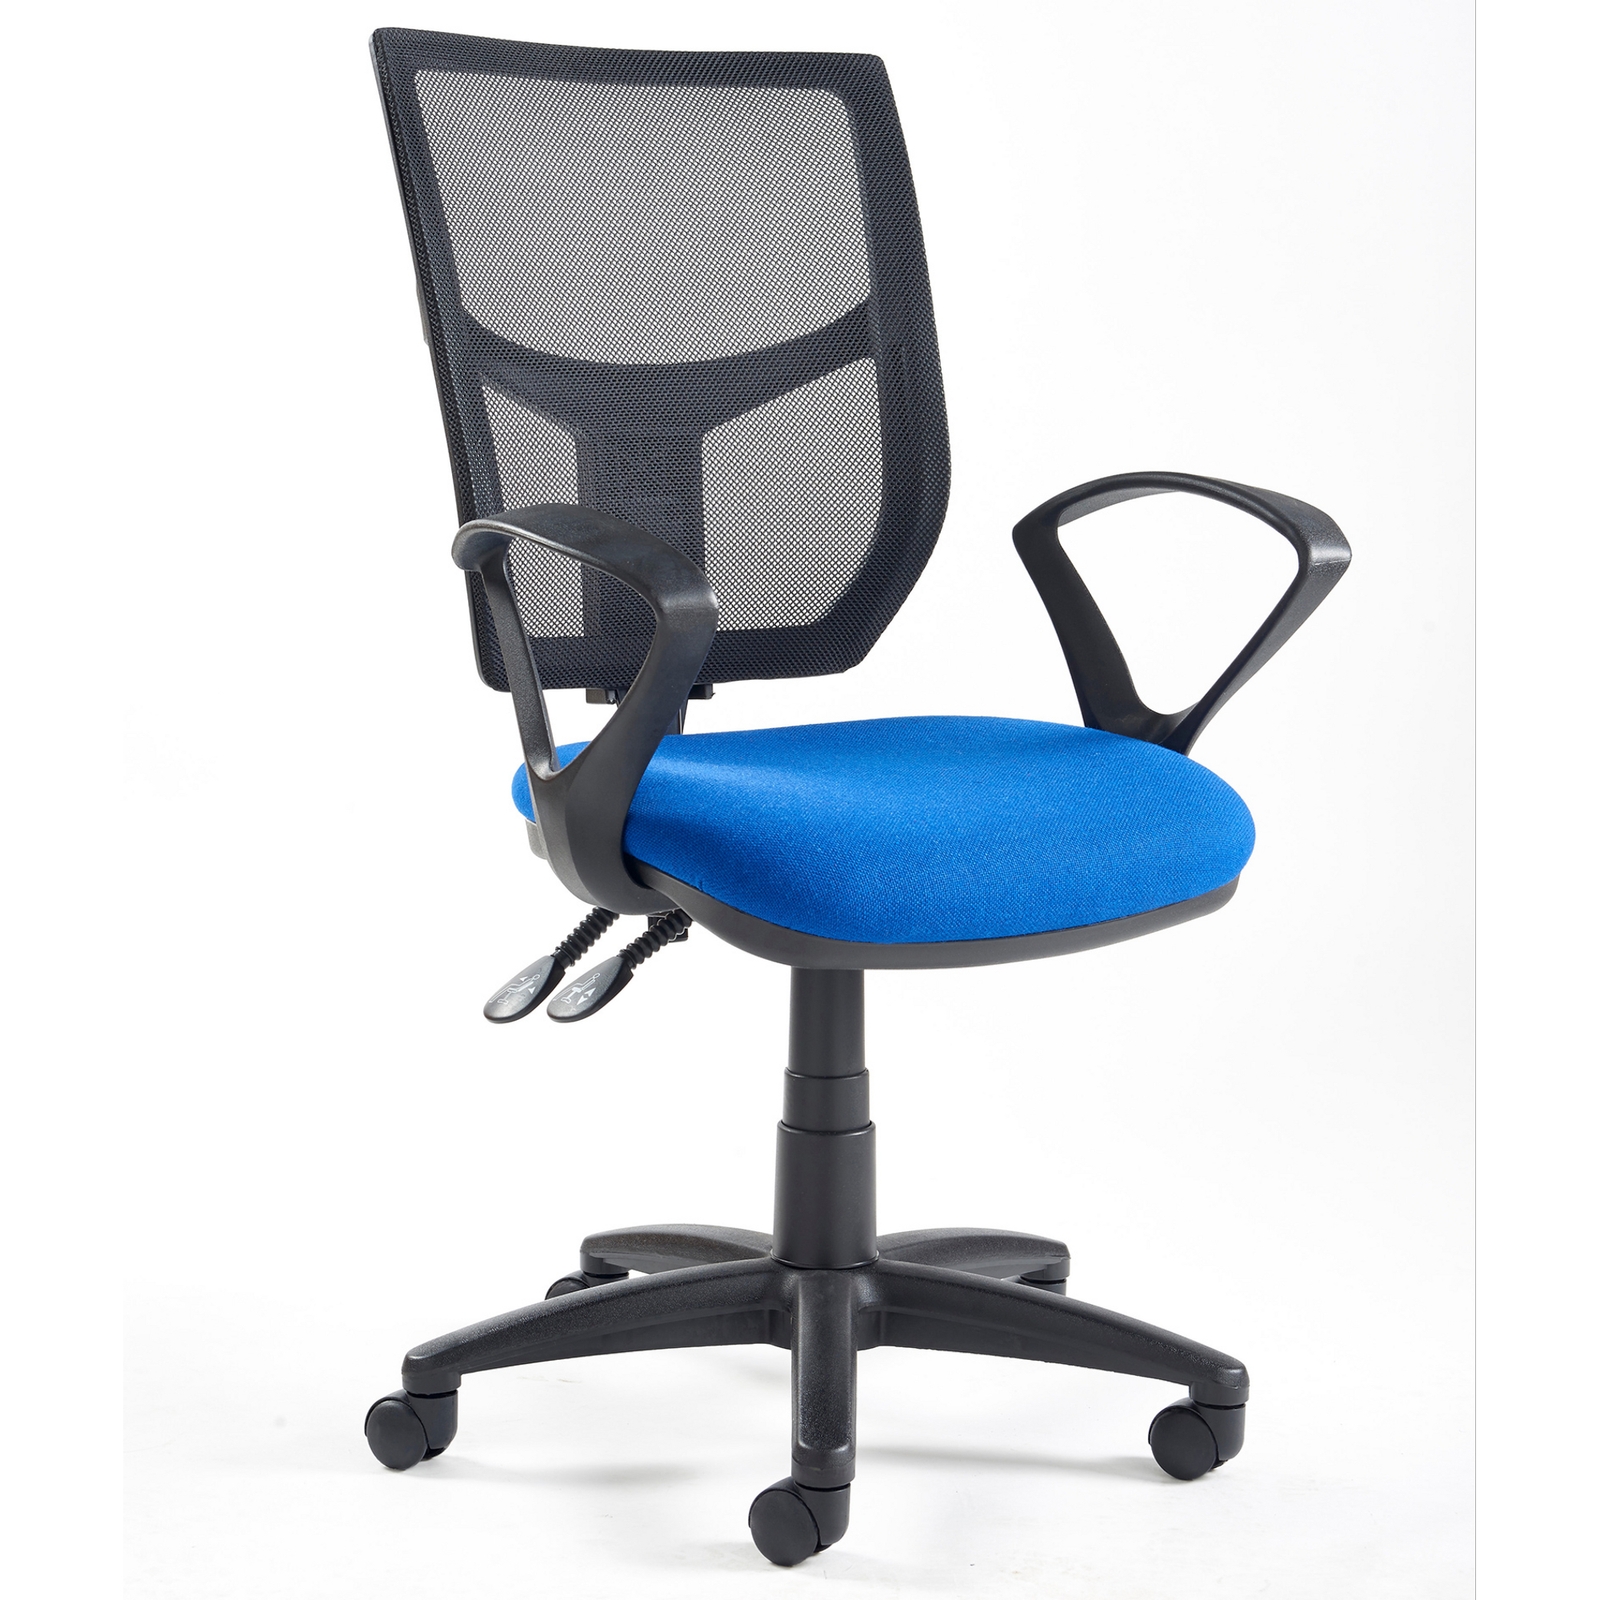 Altino High Back Operator's Chair - Blue